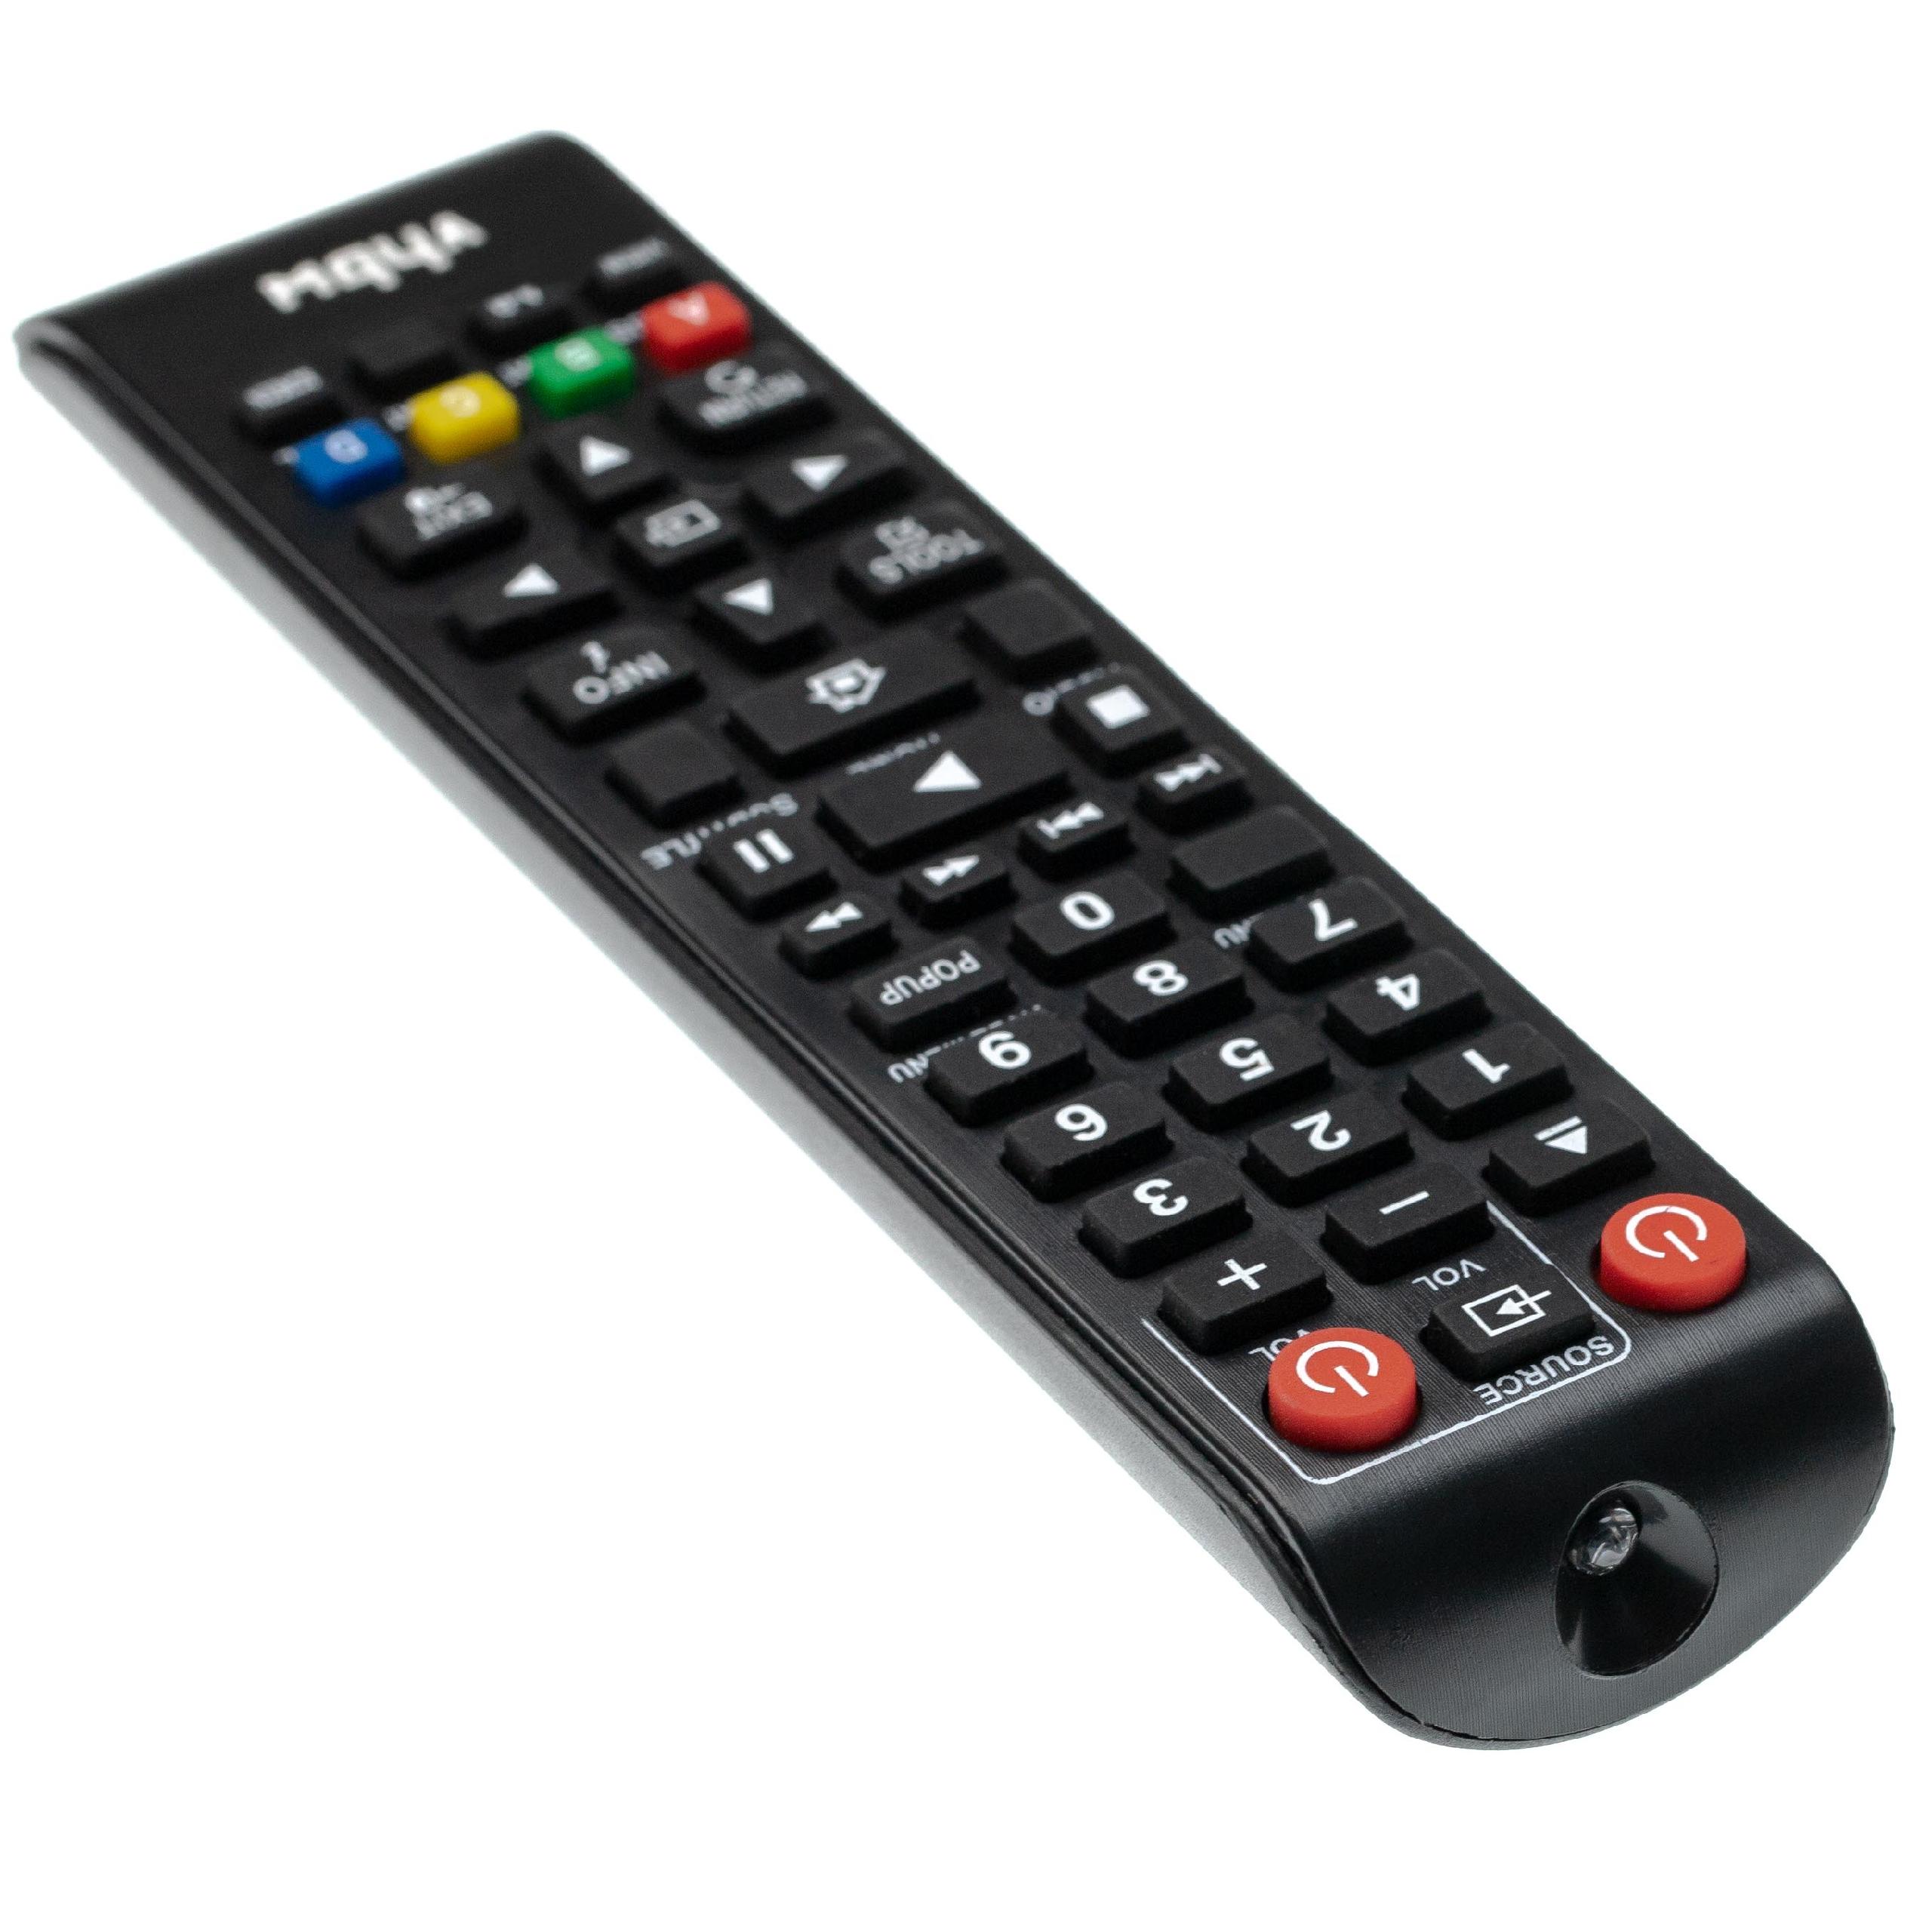 Remote Control replaces Samsung AK59-00149A for Samsung Blu-Ray Disc Player